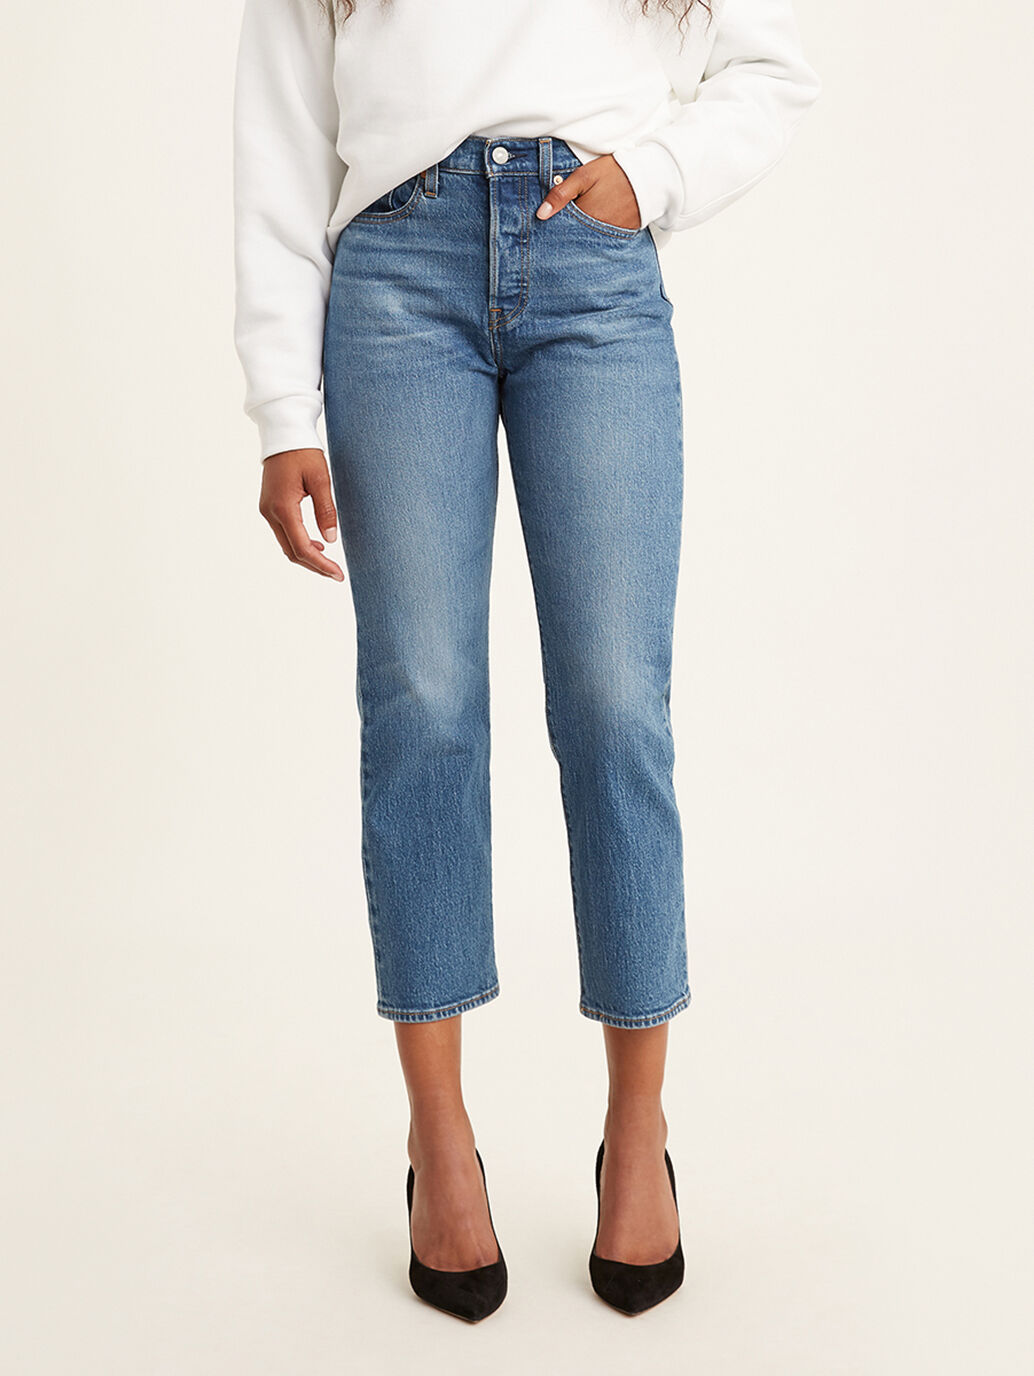 wedgie fit straight women's jeans